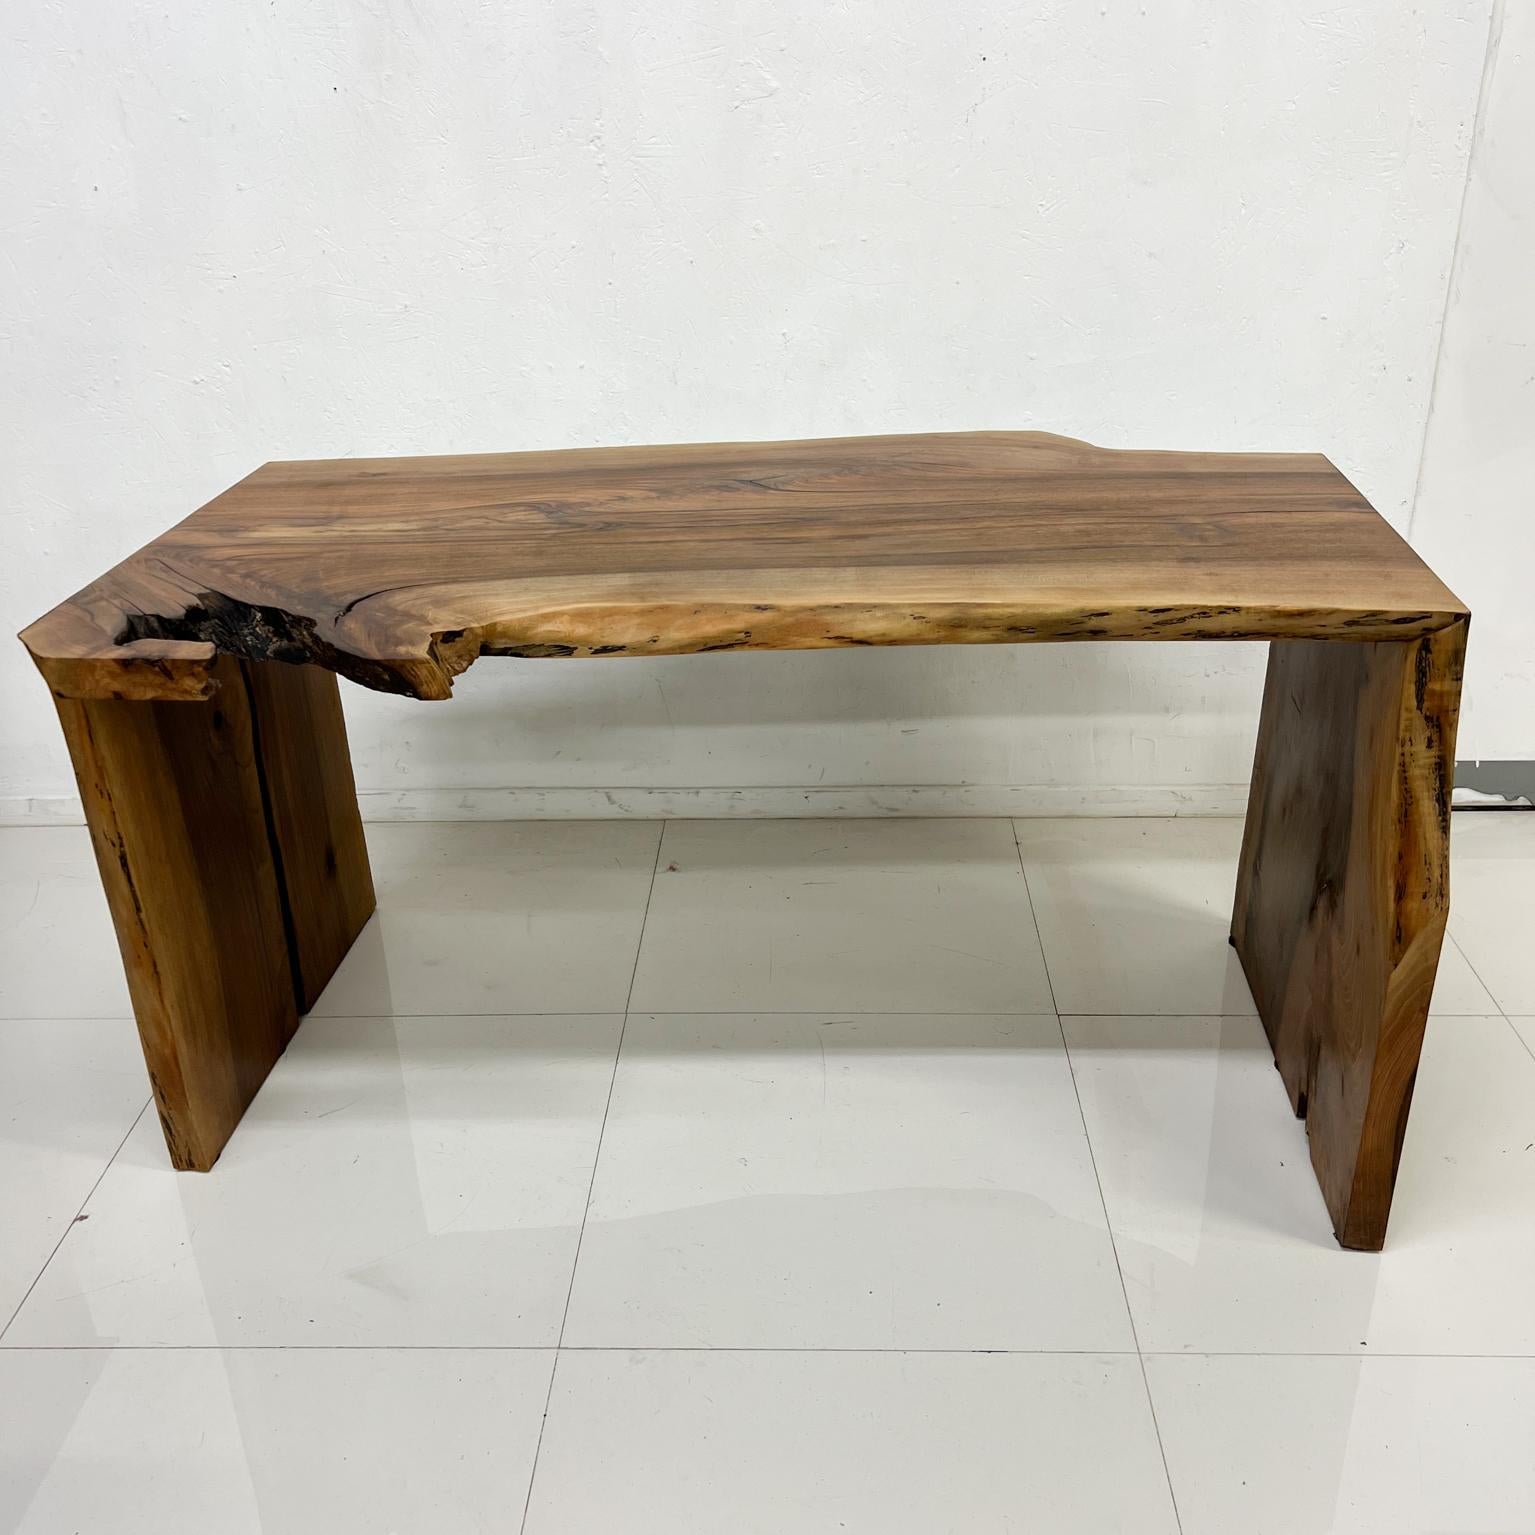 Custom Desk in natural Walnut wood, Live edge Waterfall Form, inspiration George Nakashima.
Desk 55.75 w x 34 d x 28.25 tall, Knee clearance 26 tall x 52 w
Maker information unknown.
Handcrafted firm and sturdy. Original Preowned condition.
Delivery